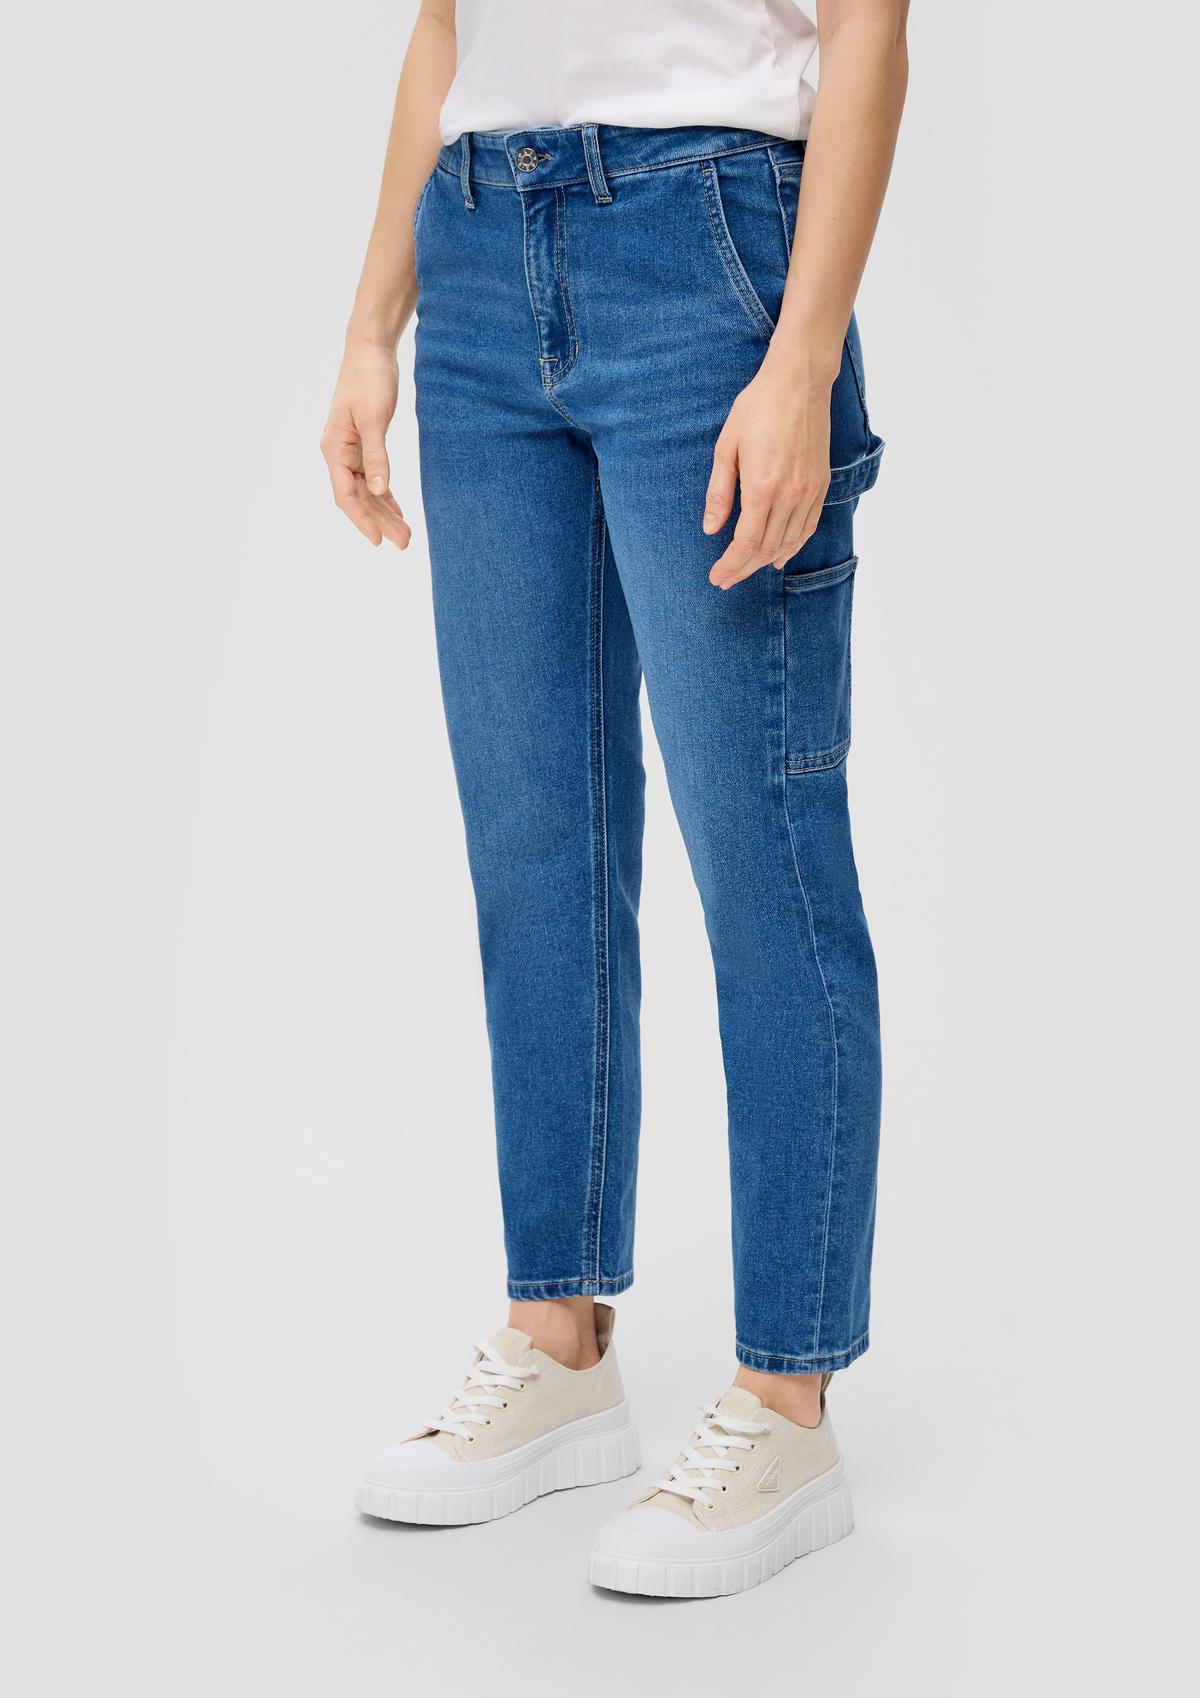 s.Oliver 360° Denim / Ankle Jeans Francis / Relaxed Fit / Mid Rise / Tapered Leg / Boyfriend